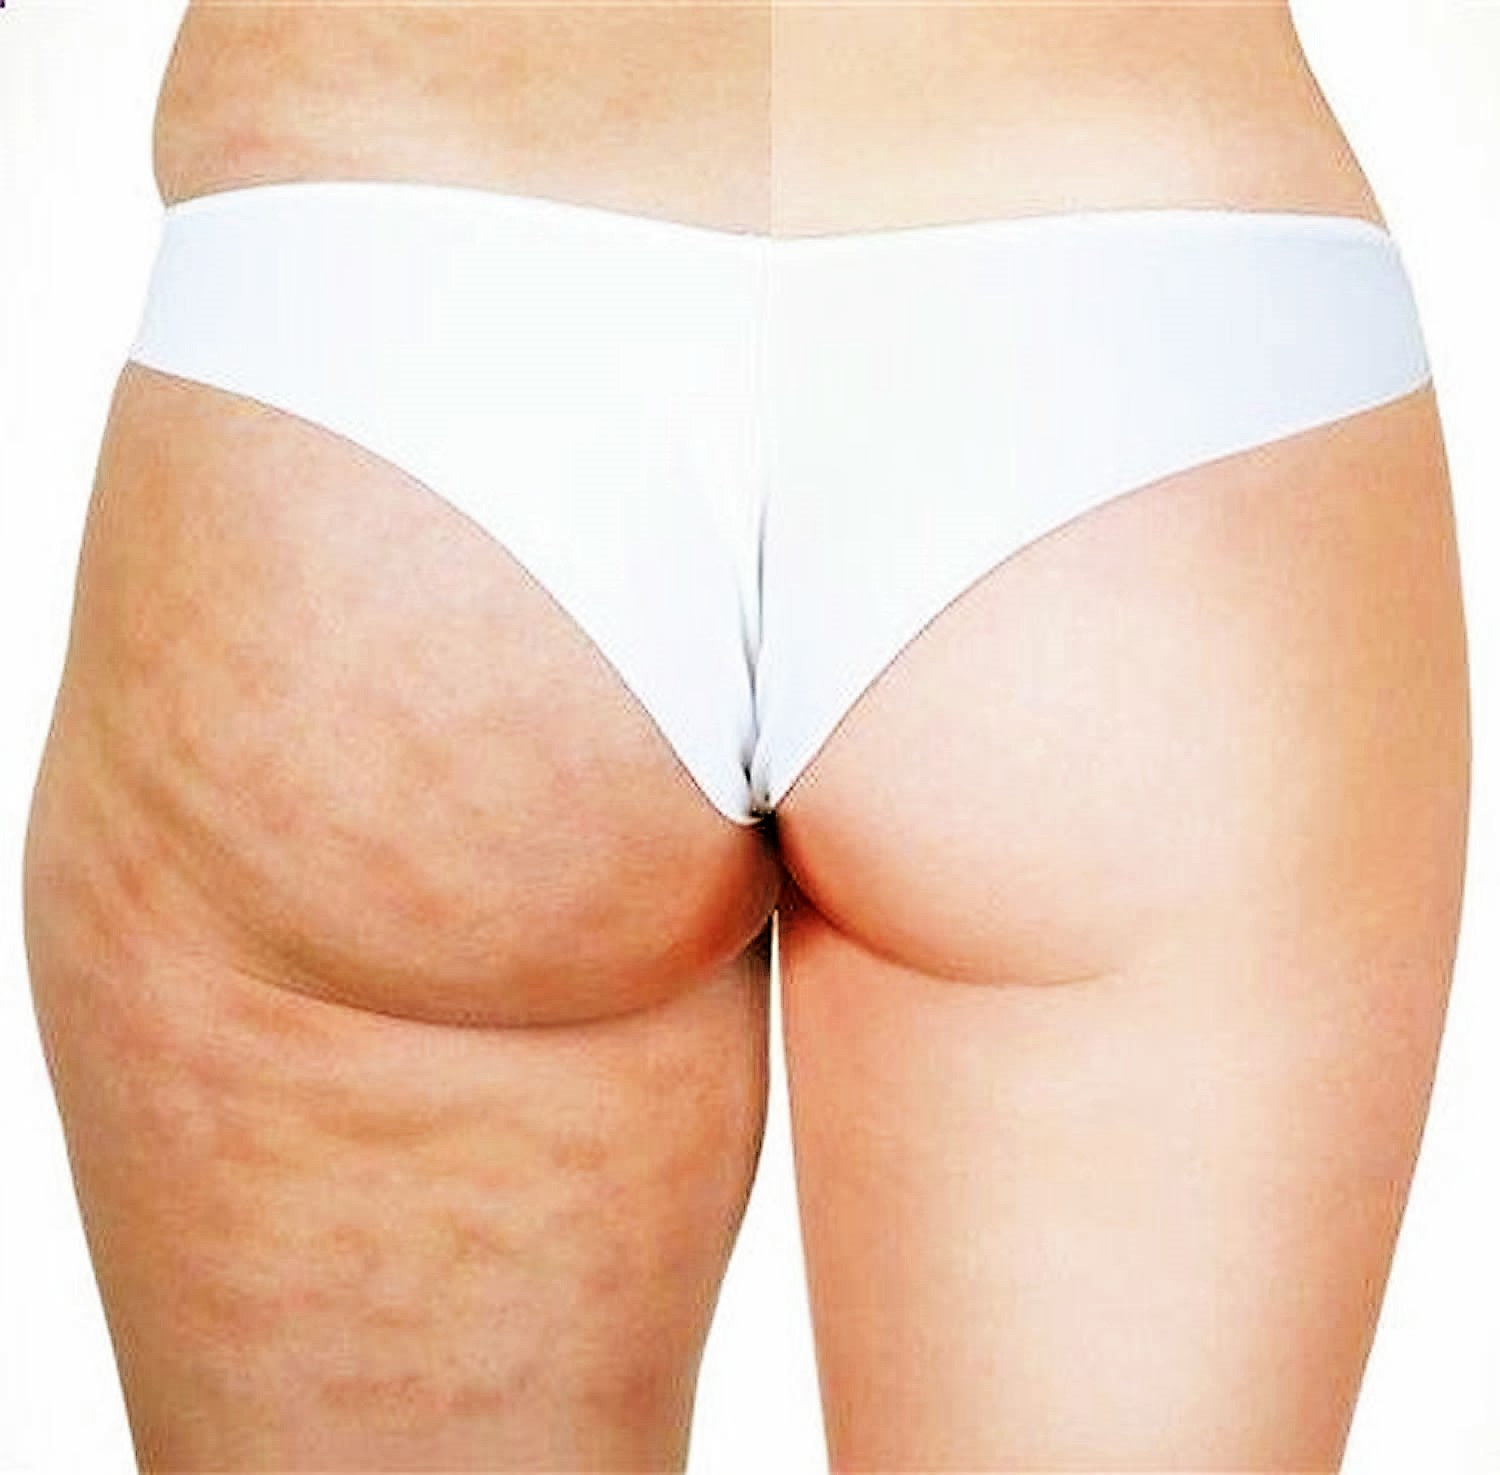 Treating Cellulite - East Bay Plastic Surgery In Oakland, Ca Can Be Fun For Everyone thumbnail